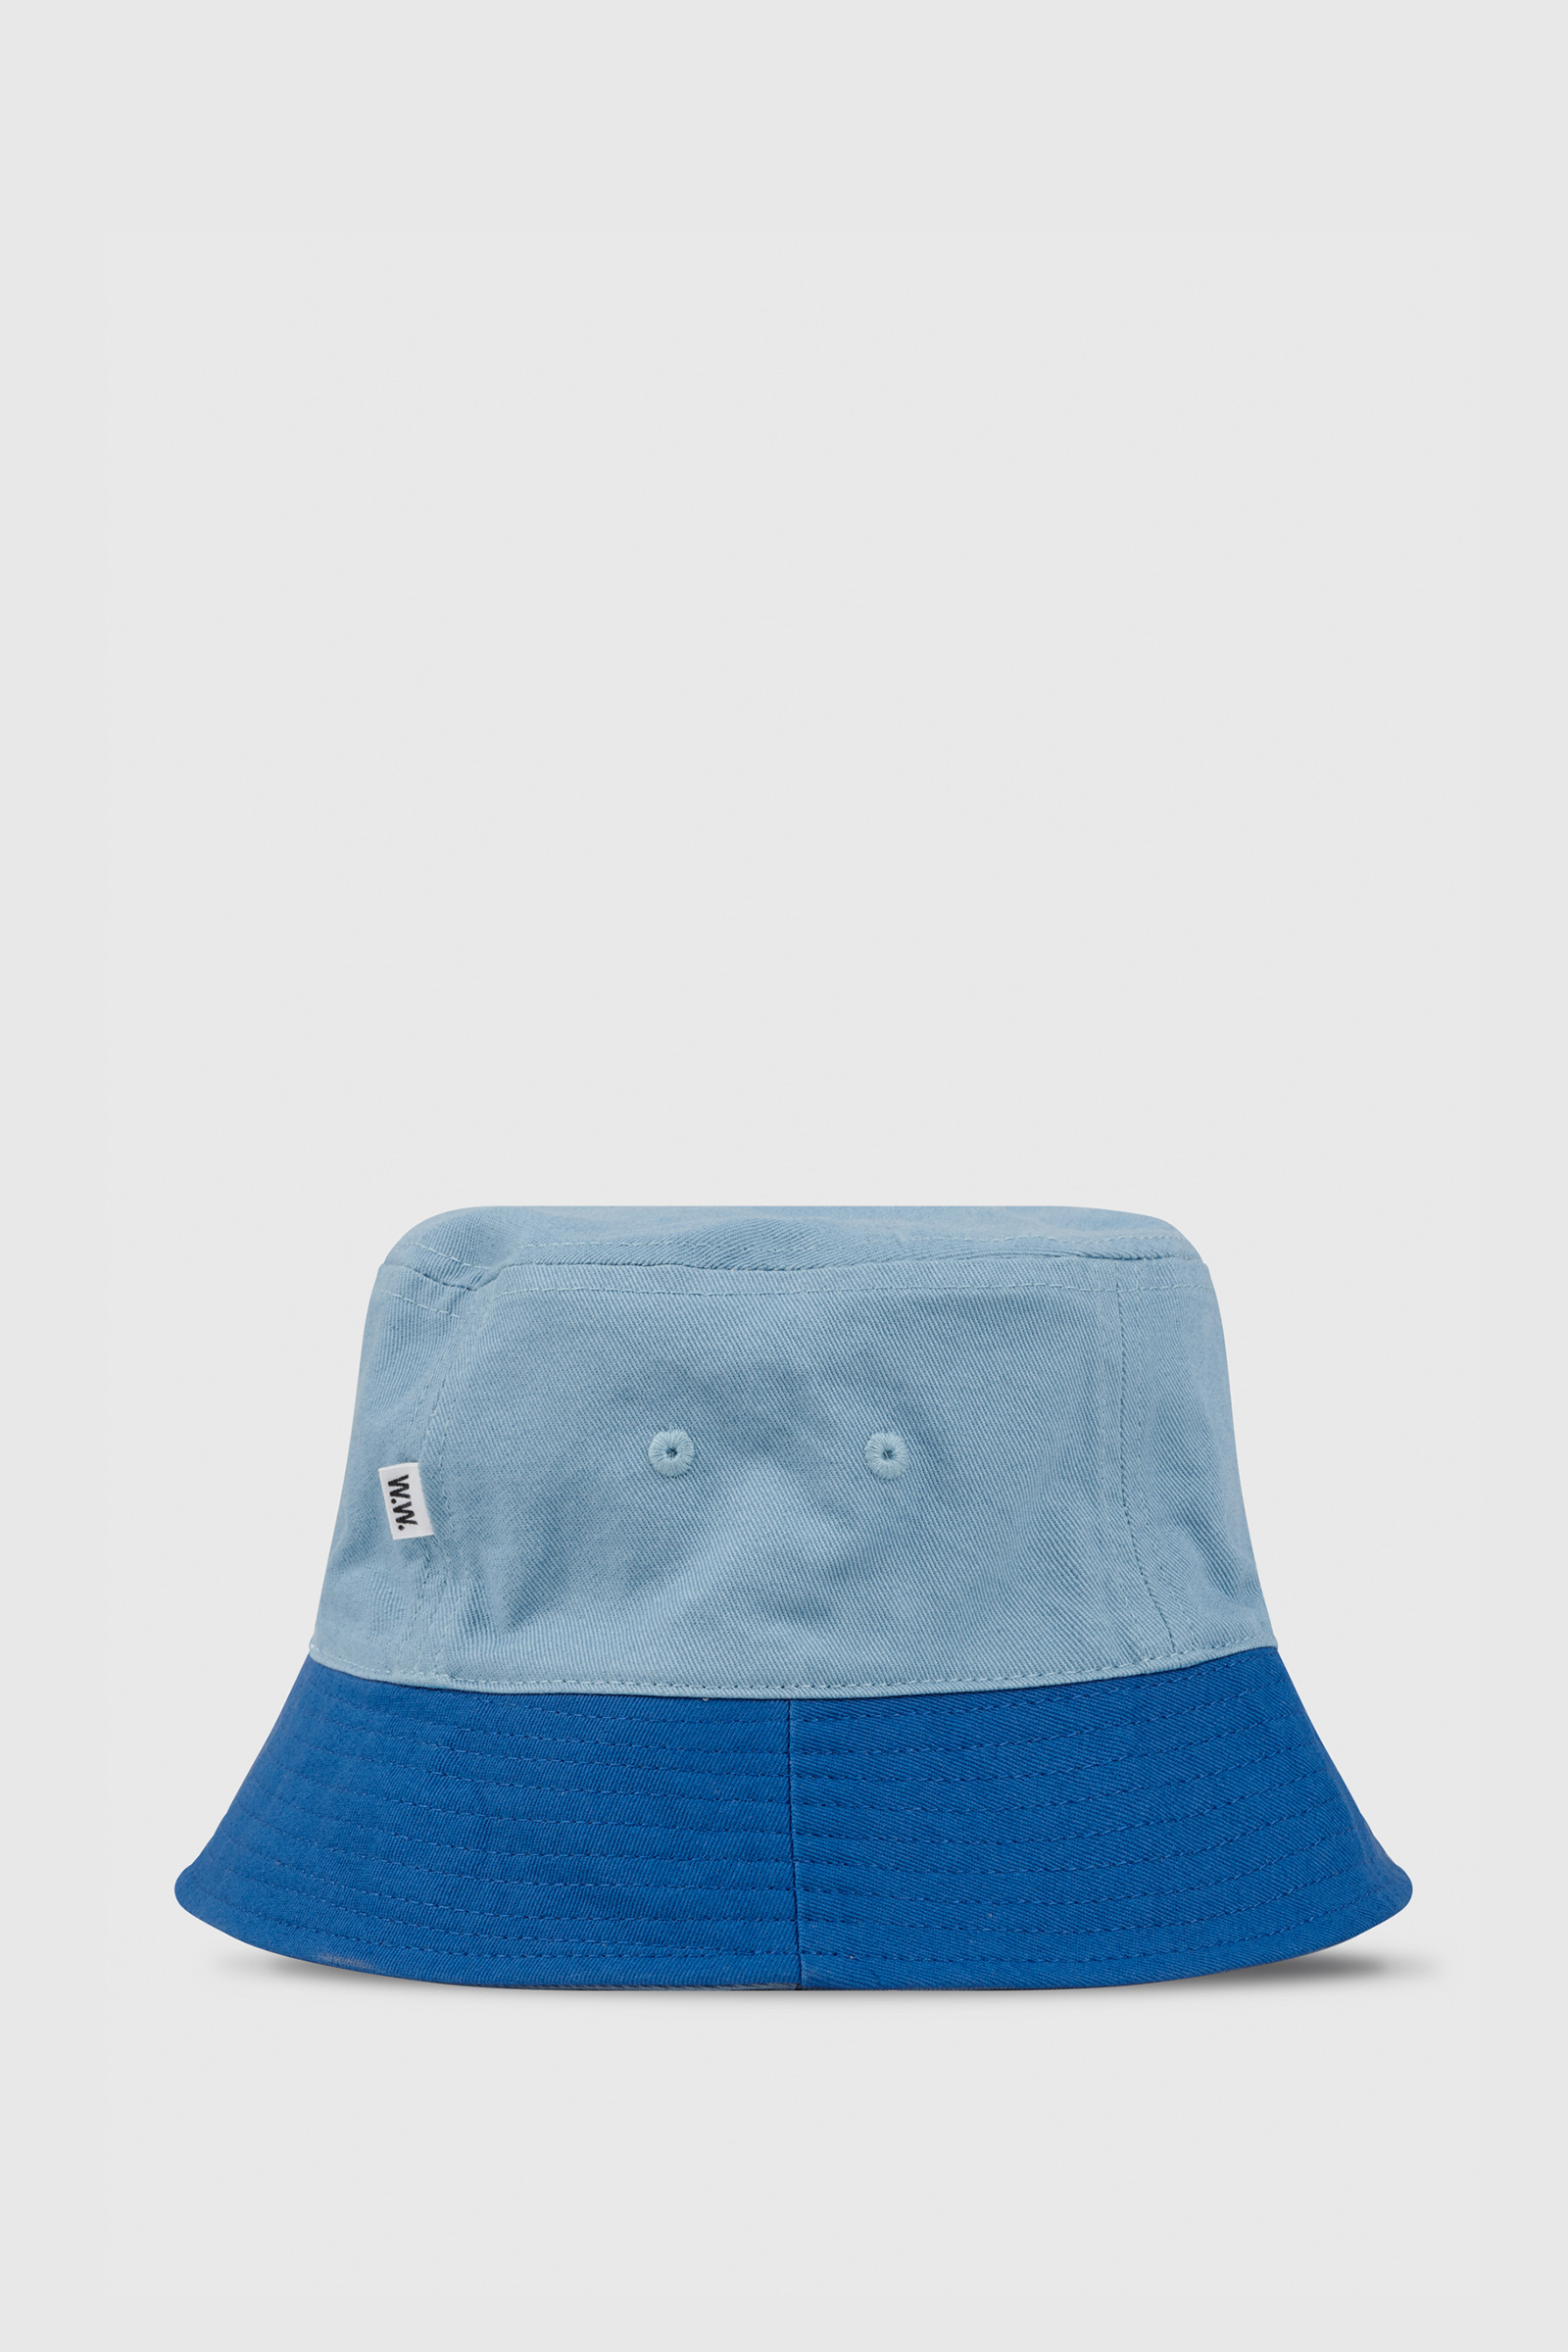 Goats Child Bucket Hat ready to ship